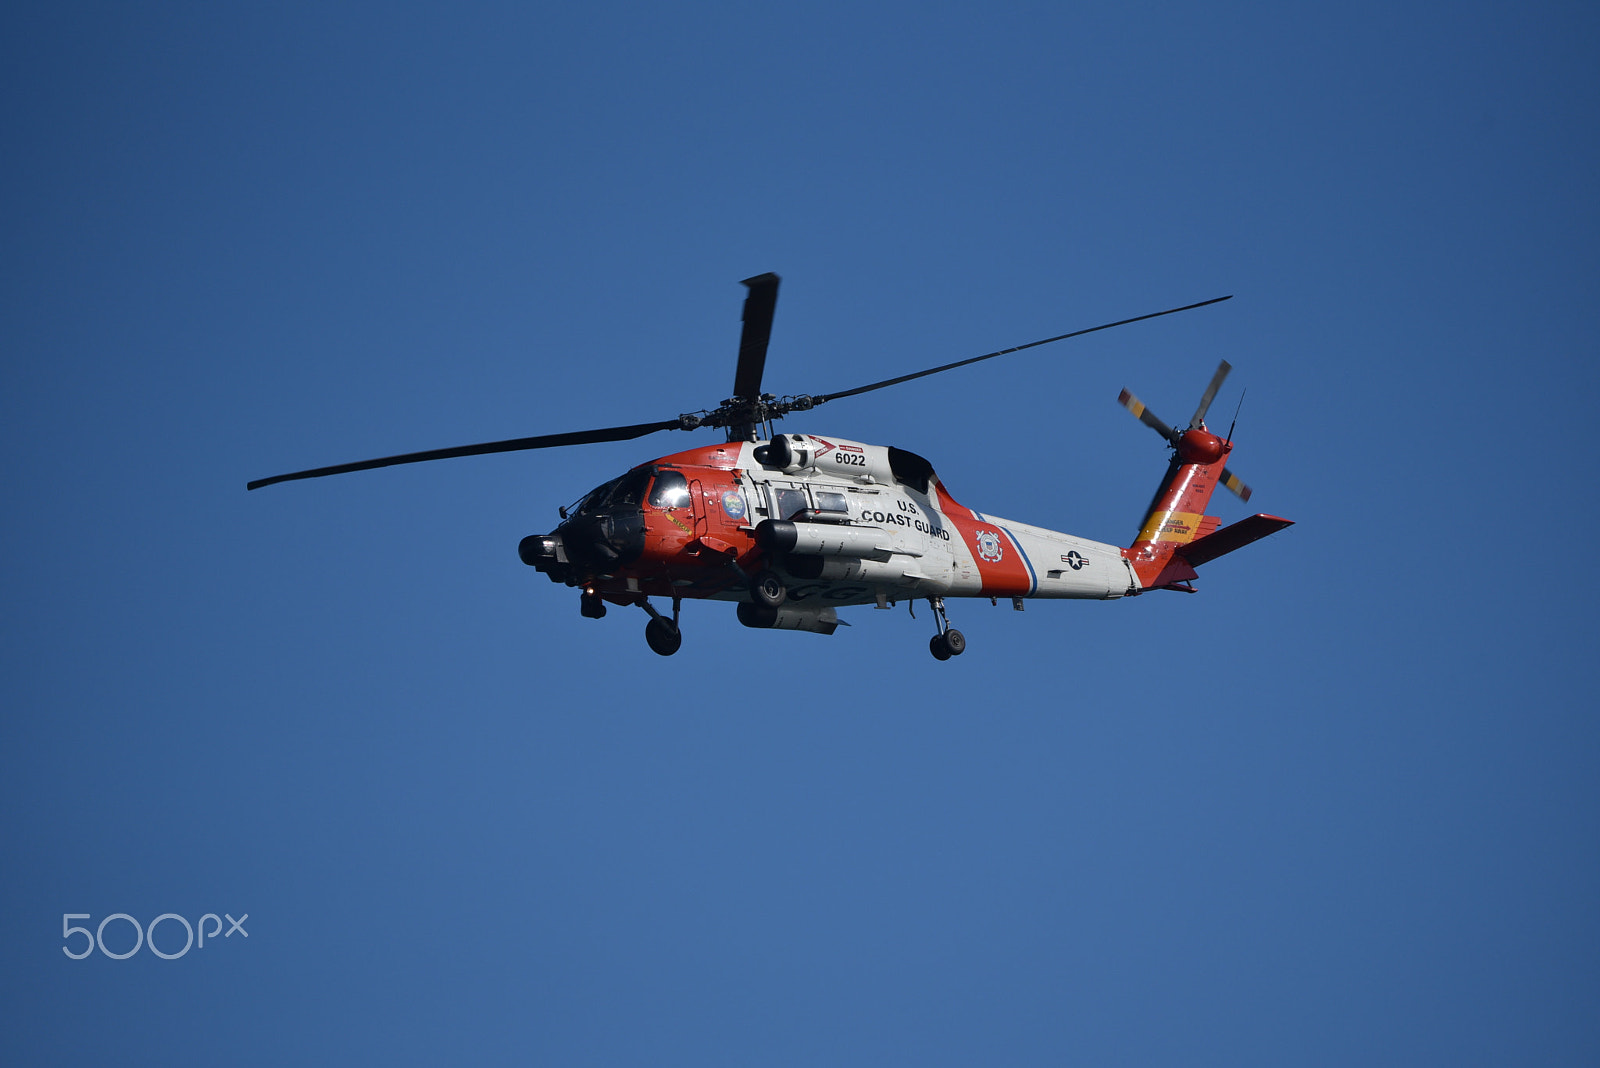 Nikon D750 sample photo. Hh-60 jayhawk helicopter used by us coast guard photography